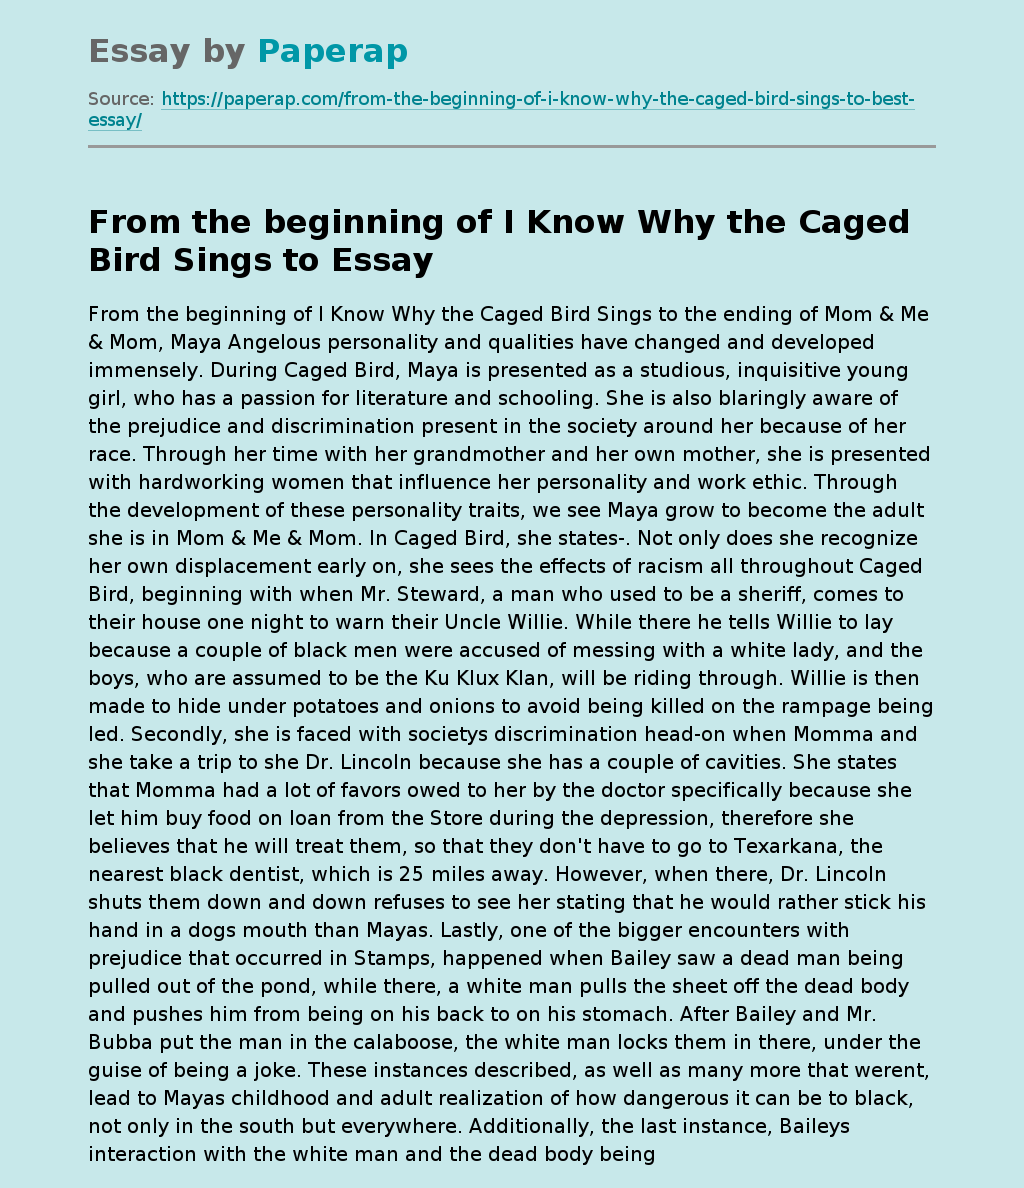 From the beginning of I Know Why the Caged Bird Sings to